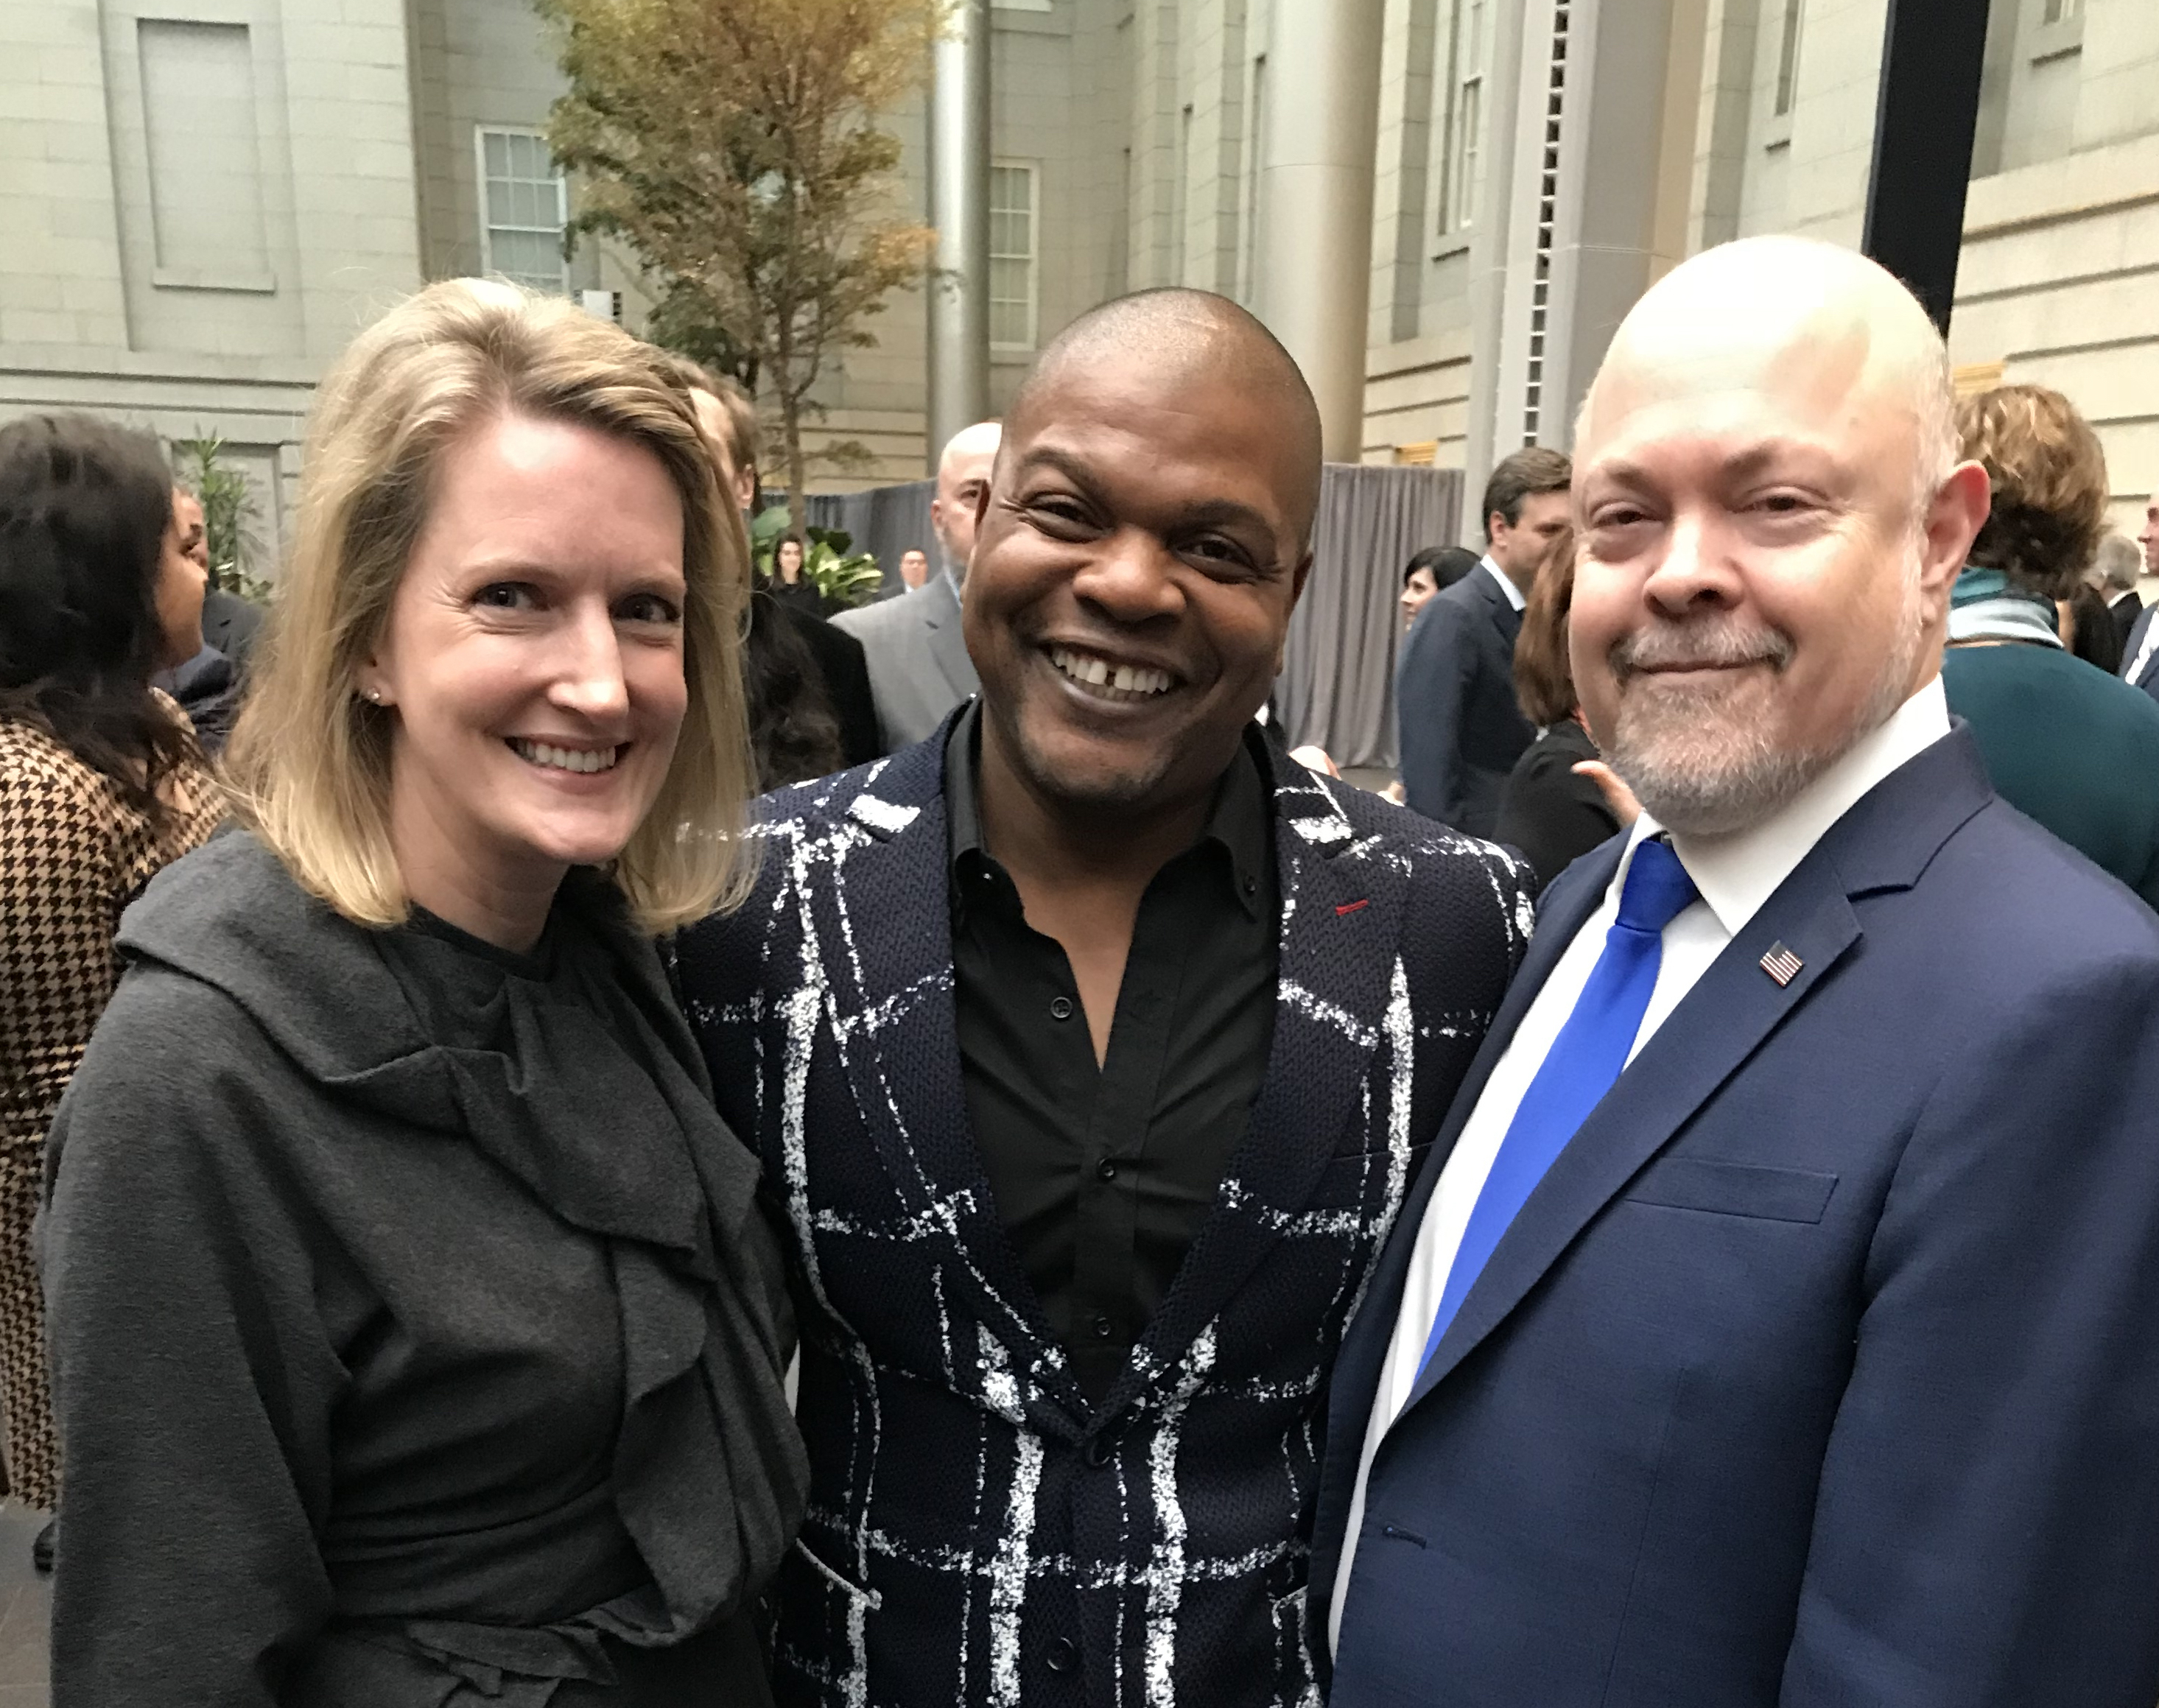 Julie Roberts, Kehinde Wiley and Bennett Roberts at the President Barack Obama Portrait Unveiling, National Portrait Gallery, Washington DC, 2018.